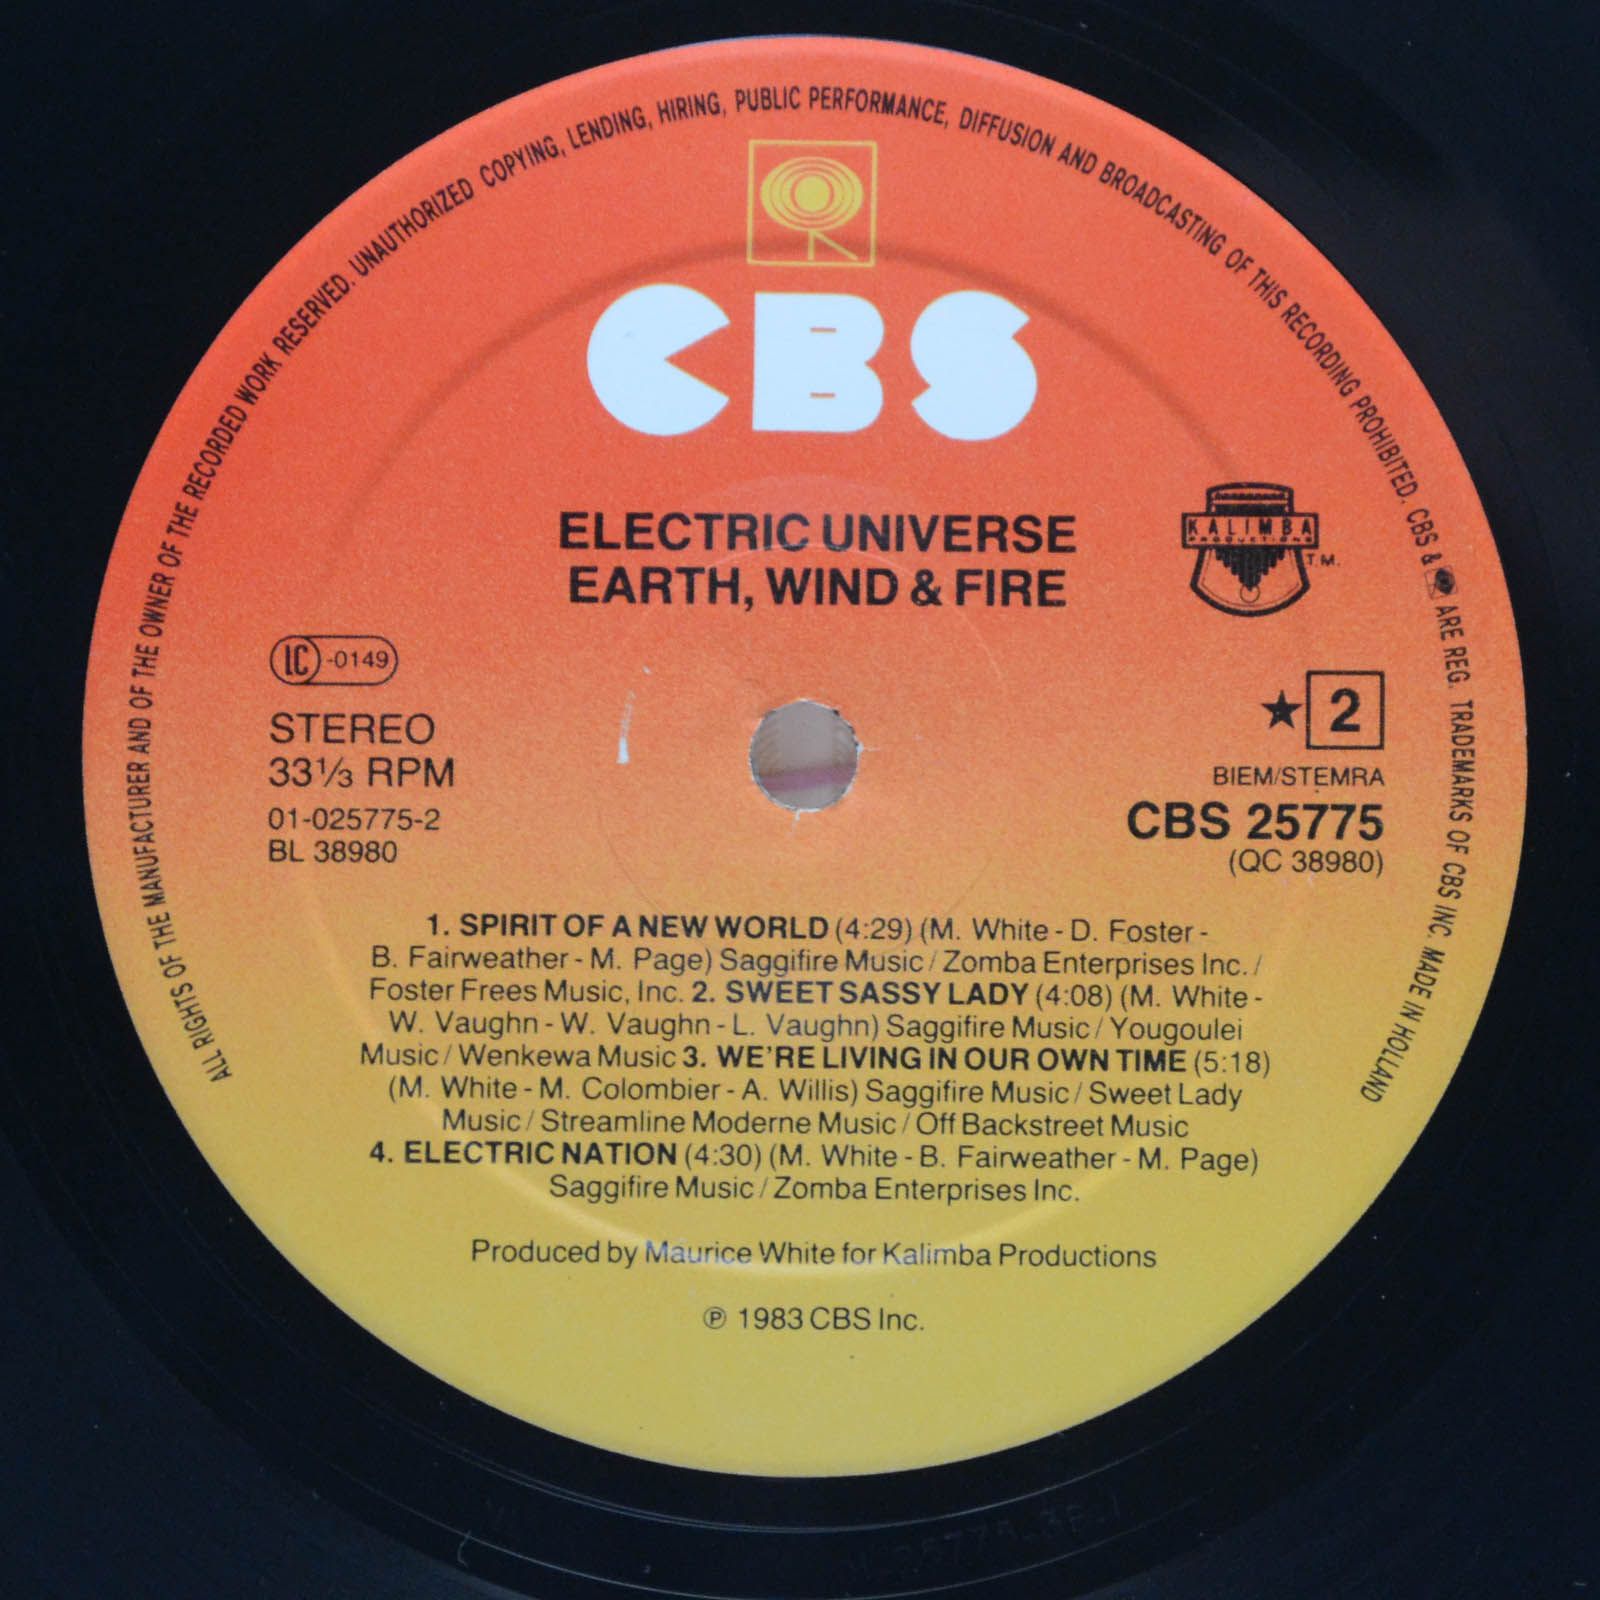 Earth, Wind & Fire — Electric Universe, 1983